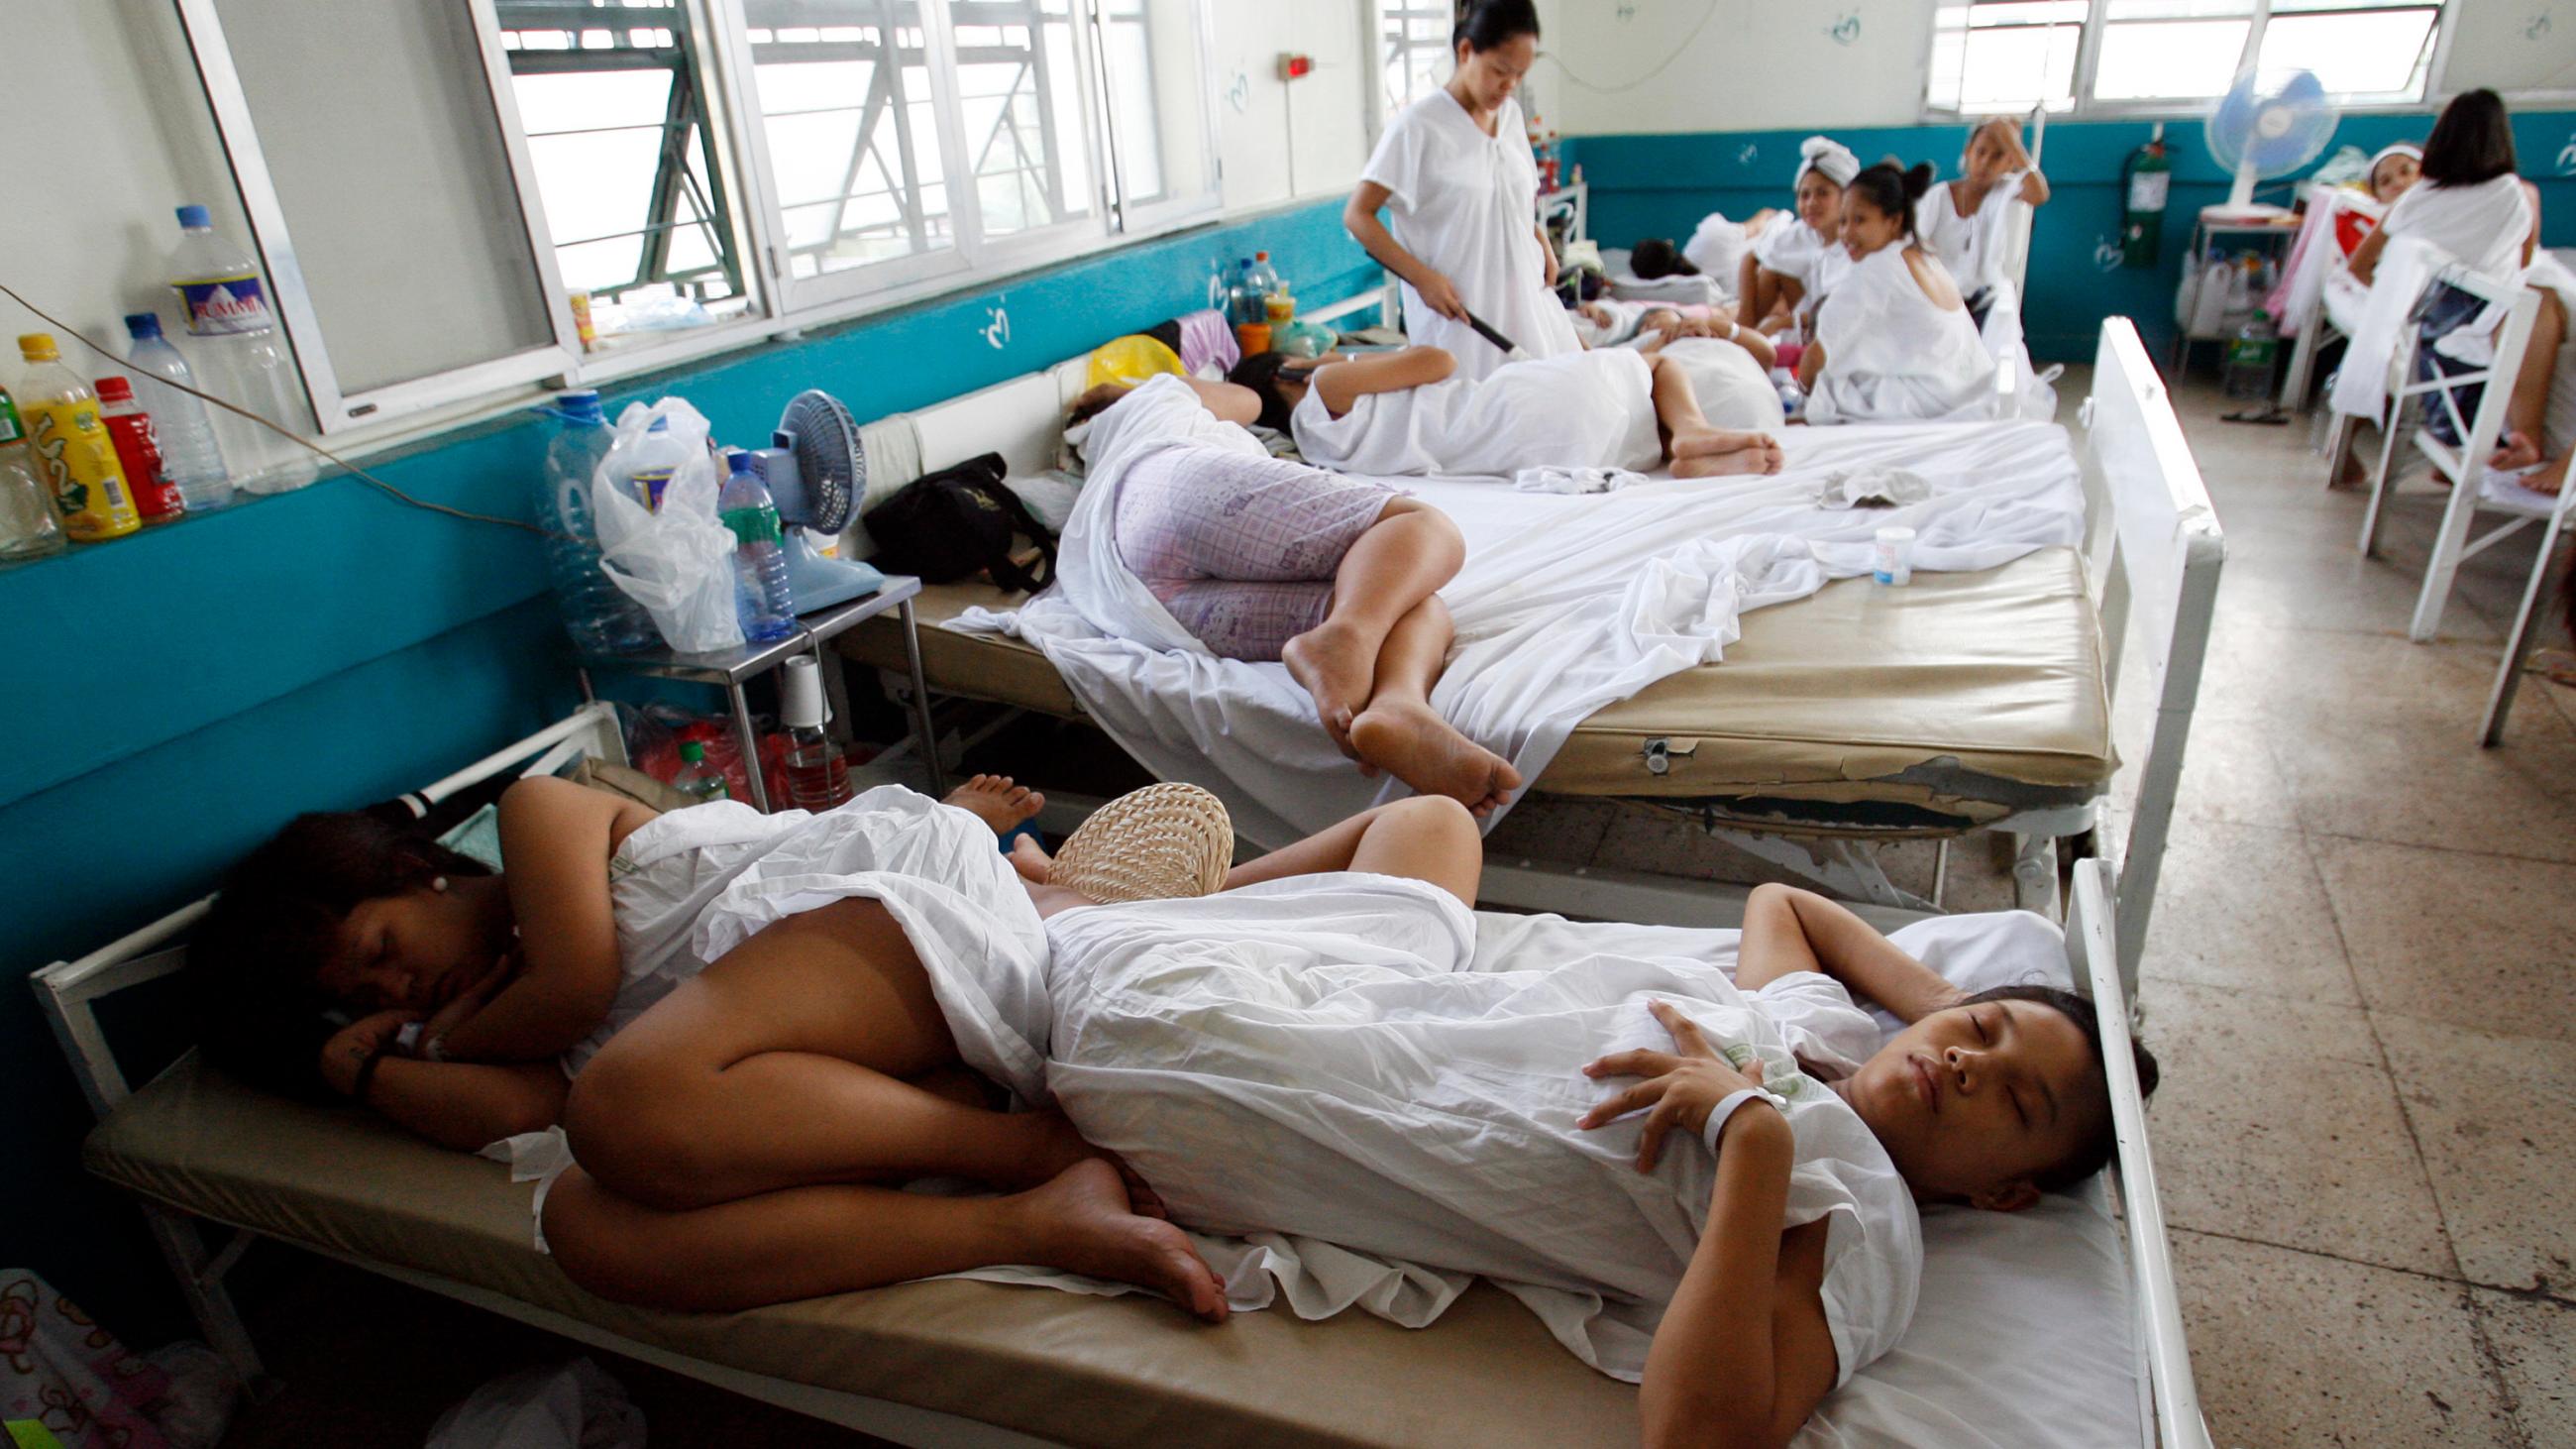 The photo shows a crowded ward with women lying two-per-bed and head-to-toe. 